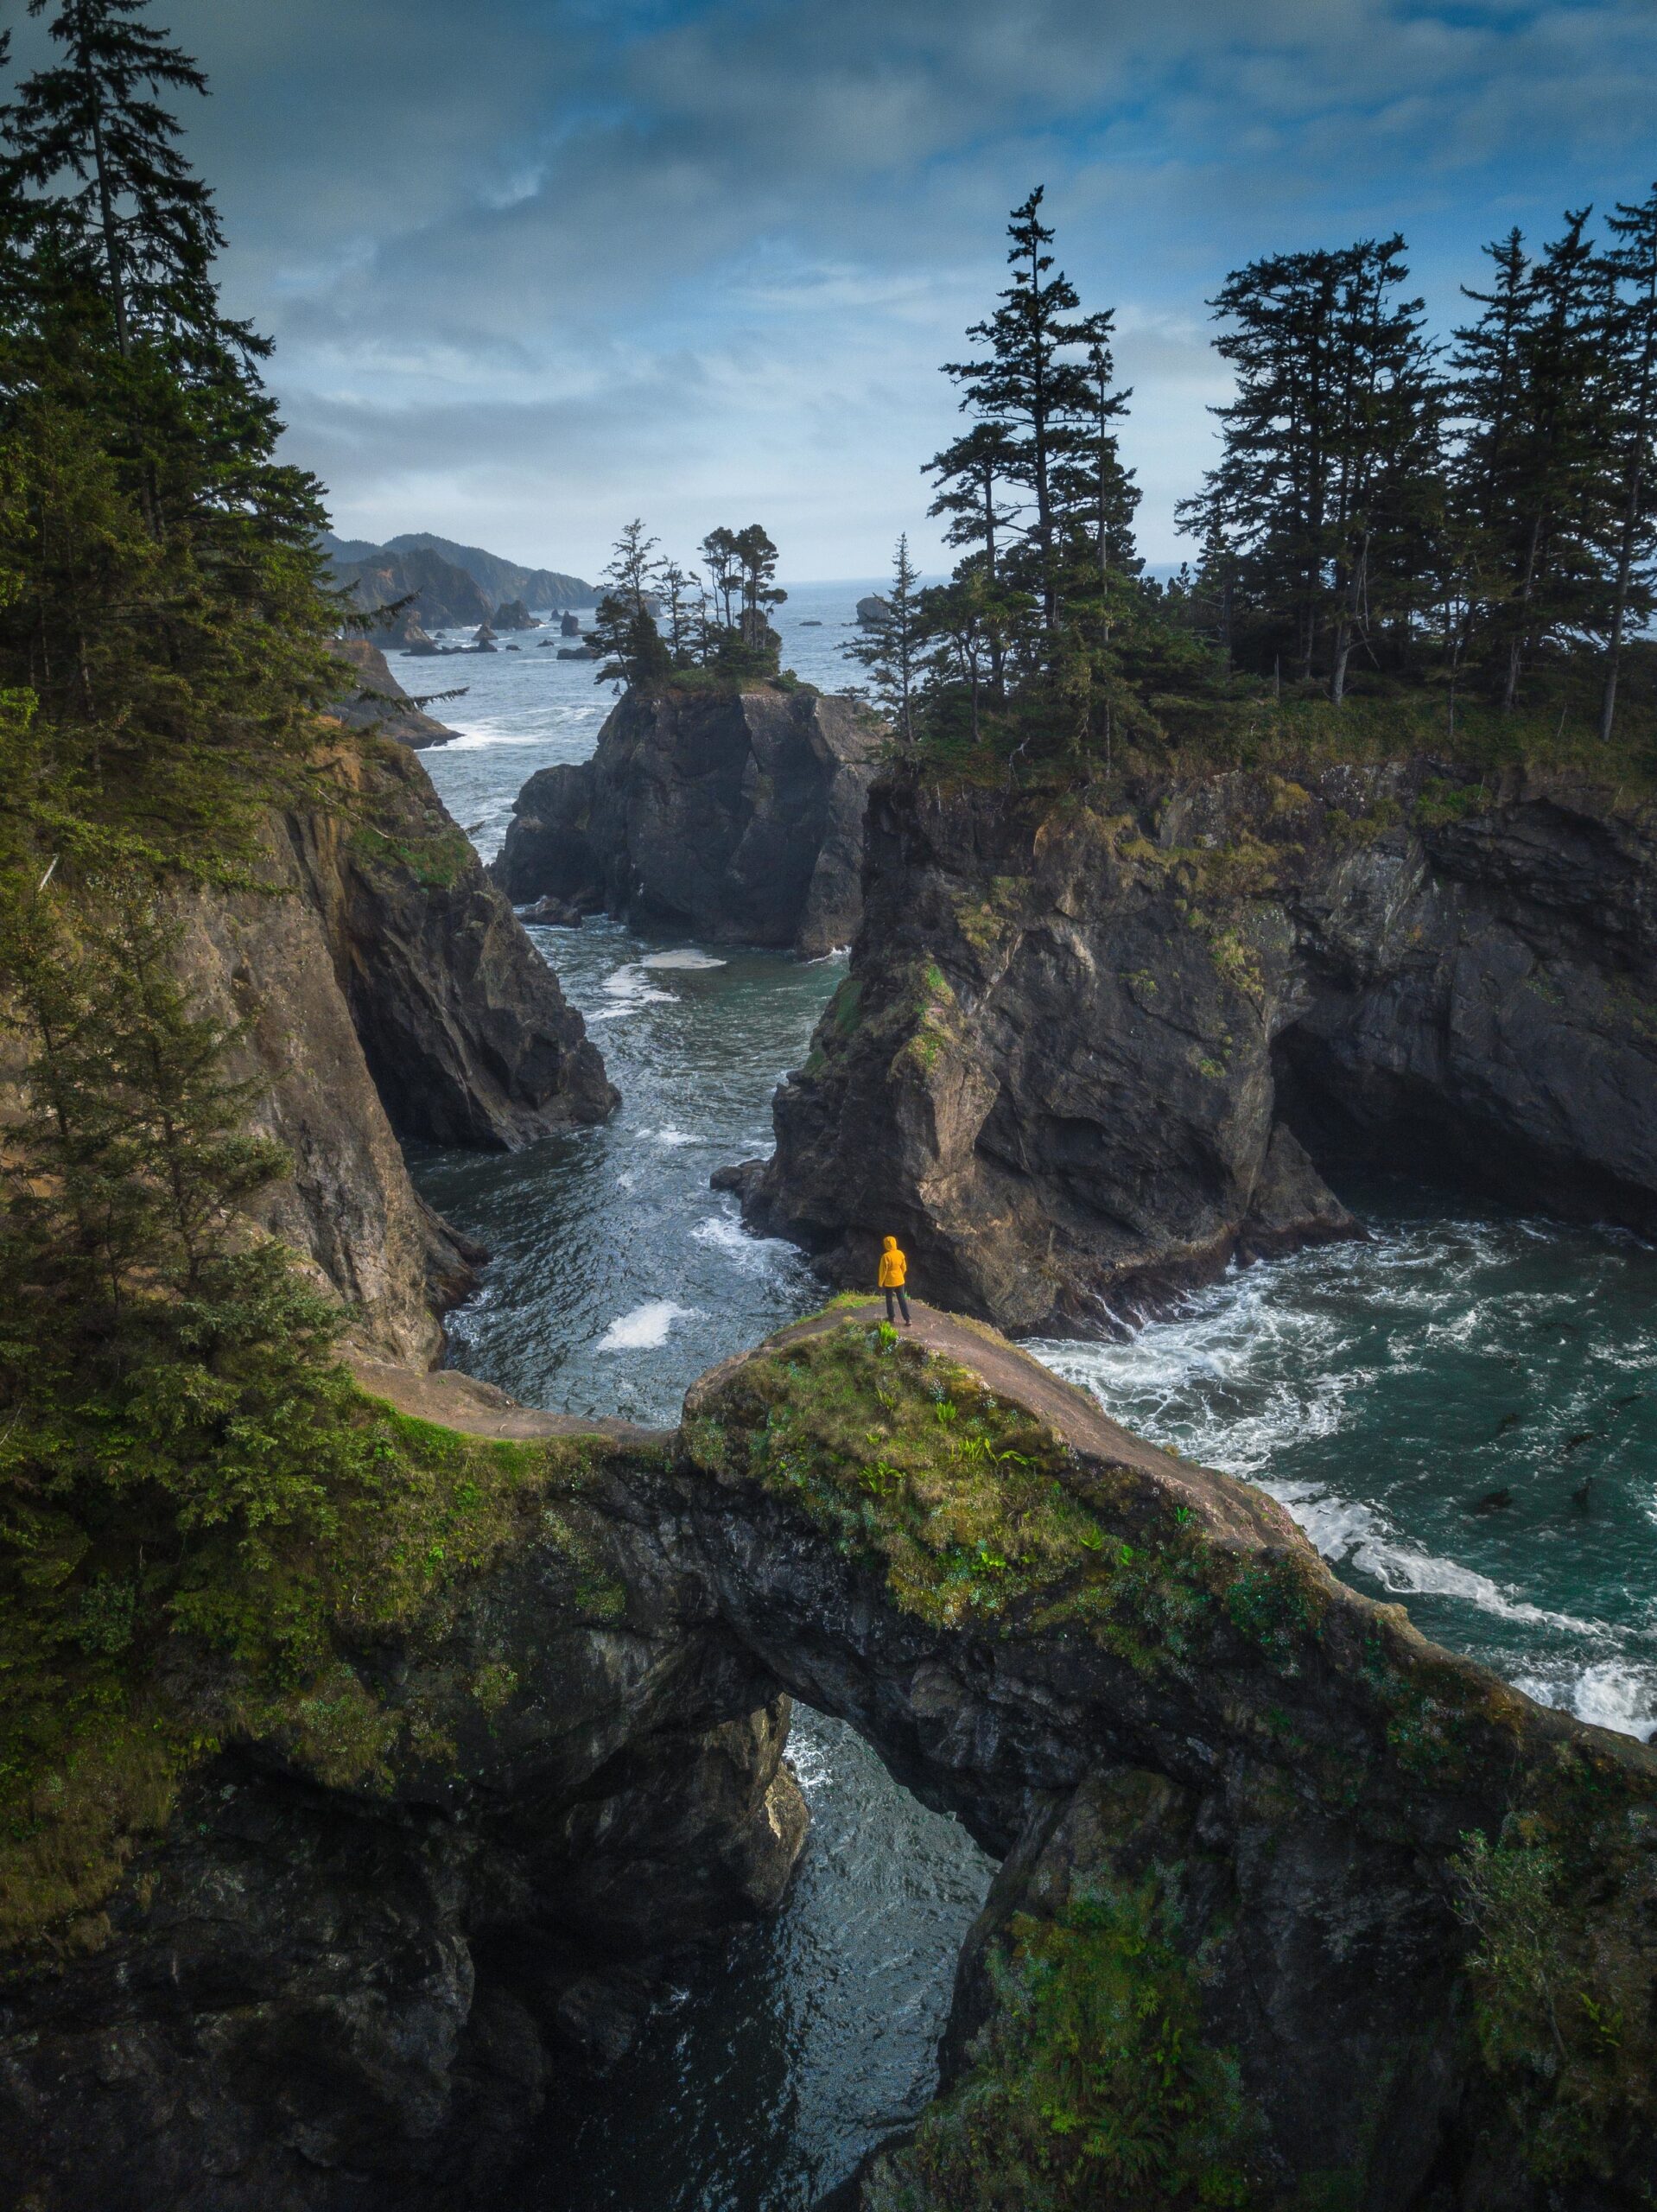 A figure in a yellow rain jacket standing on a natural arch over looking the ocean on the Samuel H. Boardman State Scenic Corridor in Oregon on an overcast day.